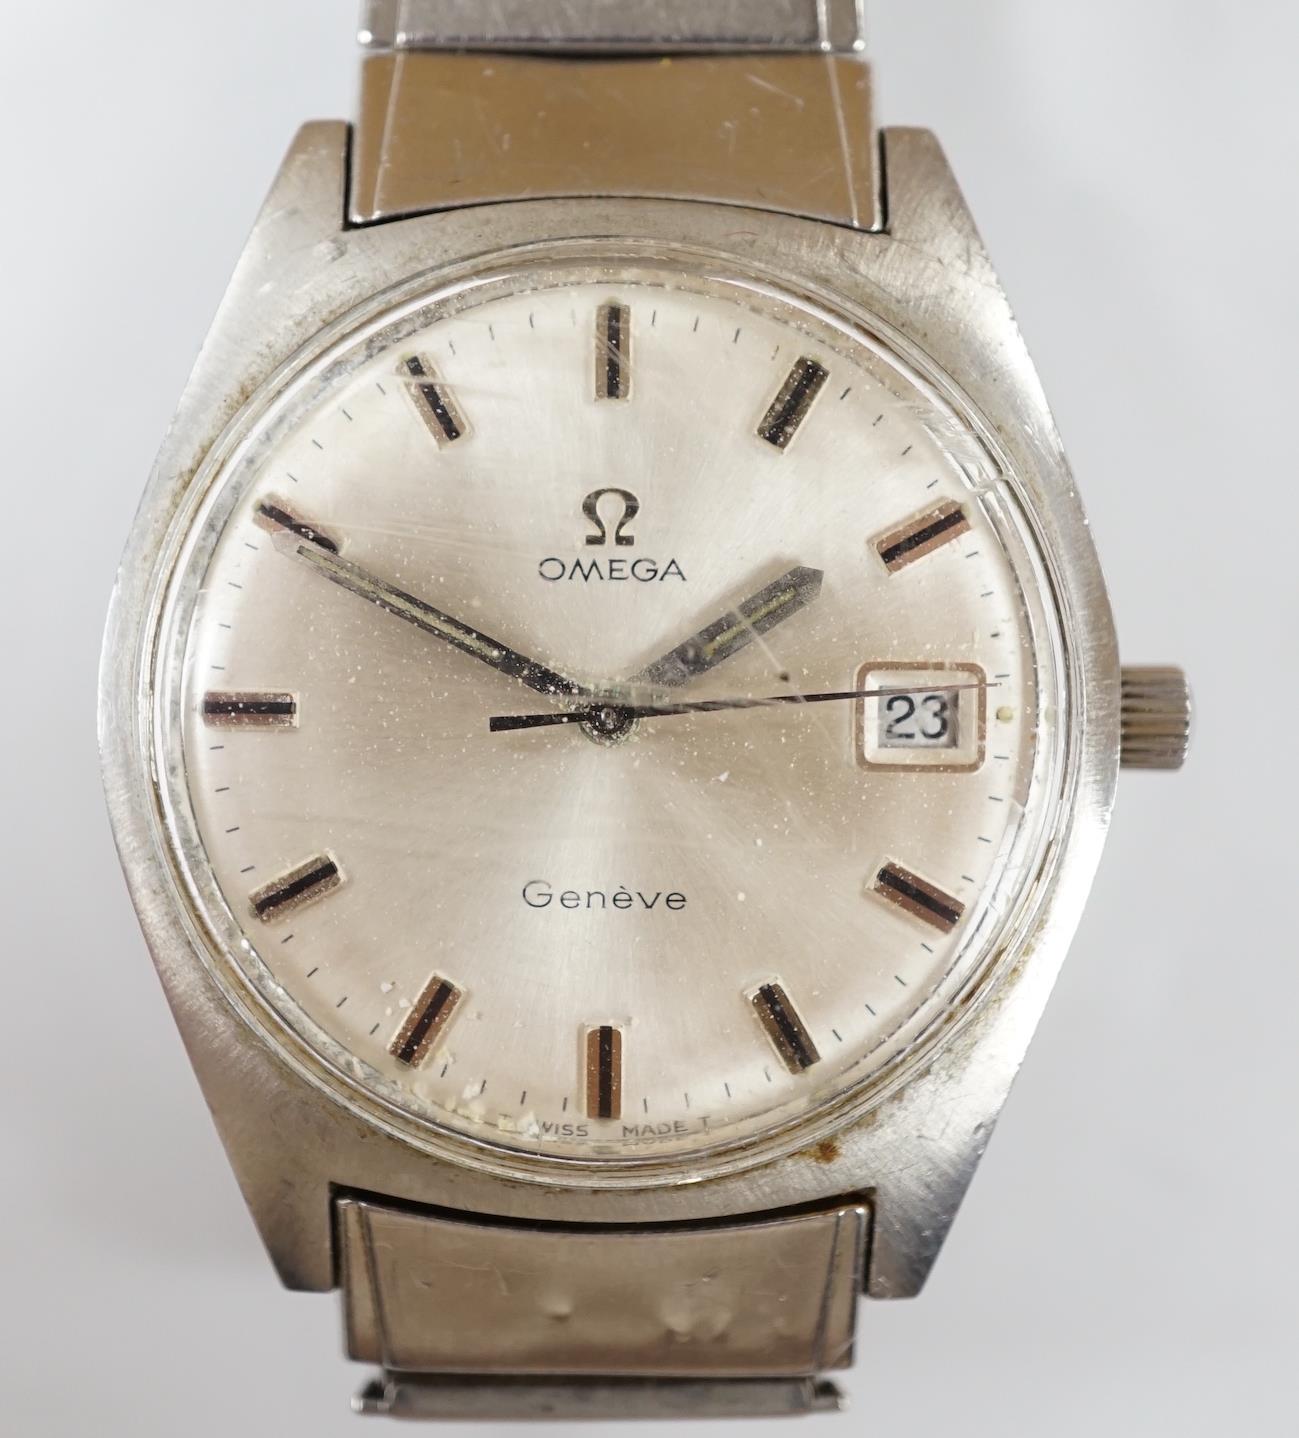 A gentleman's stainless steel Omega manual wind wrist watch, with date aperture, on associated flexible strap, case diameter 35mm, no box or papers.